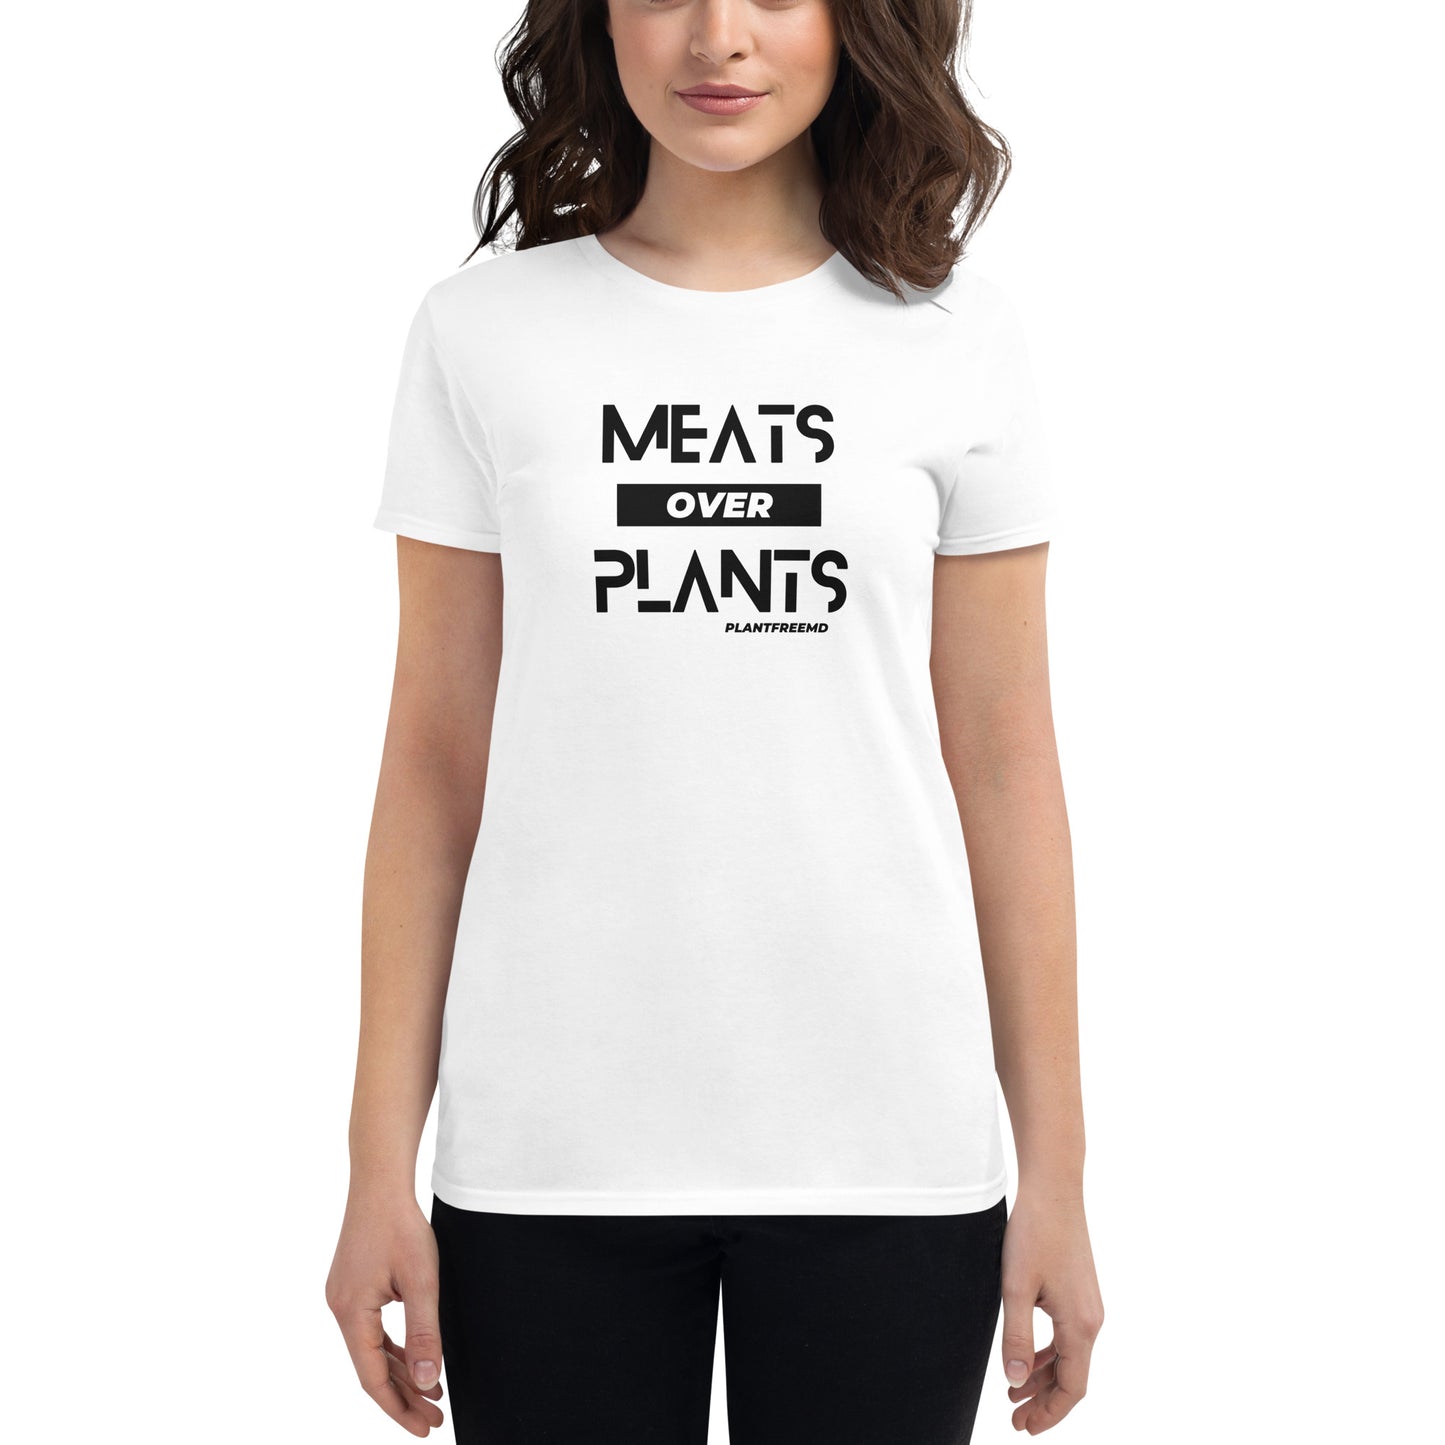 Meats Over Plants Women's Fitted T-shirt Dark